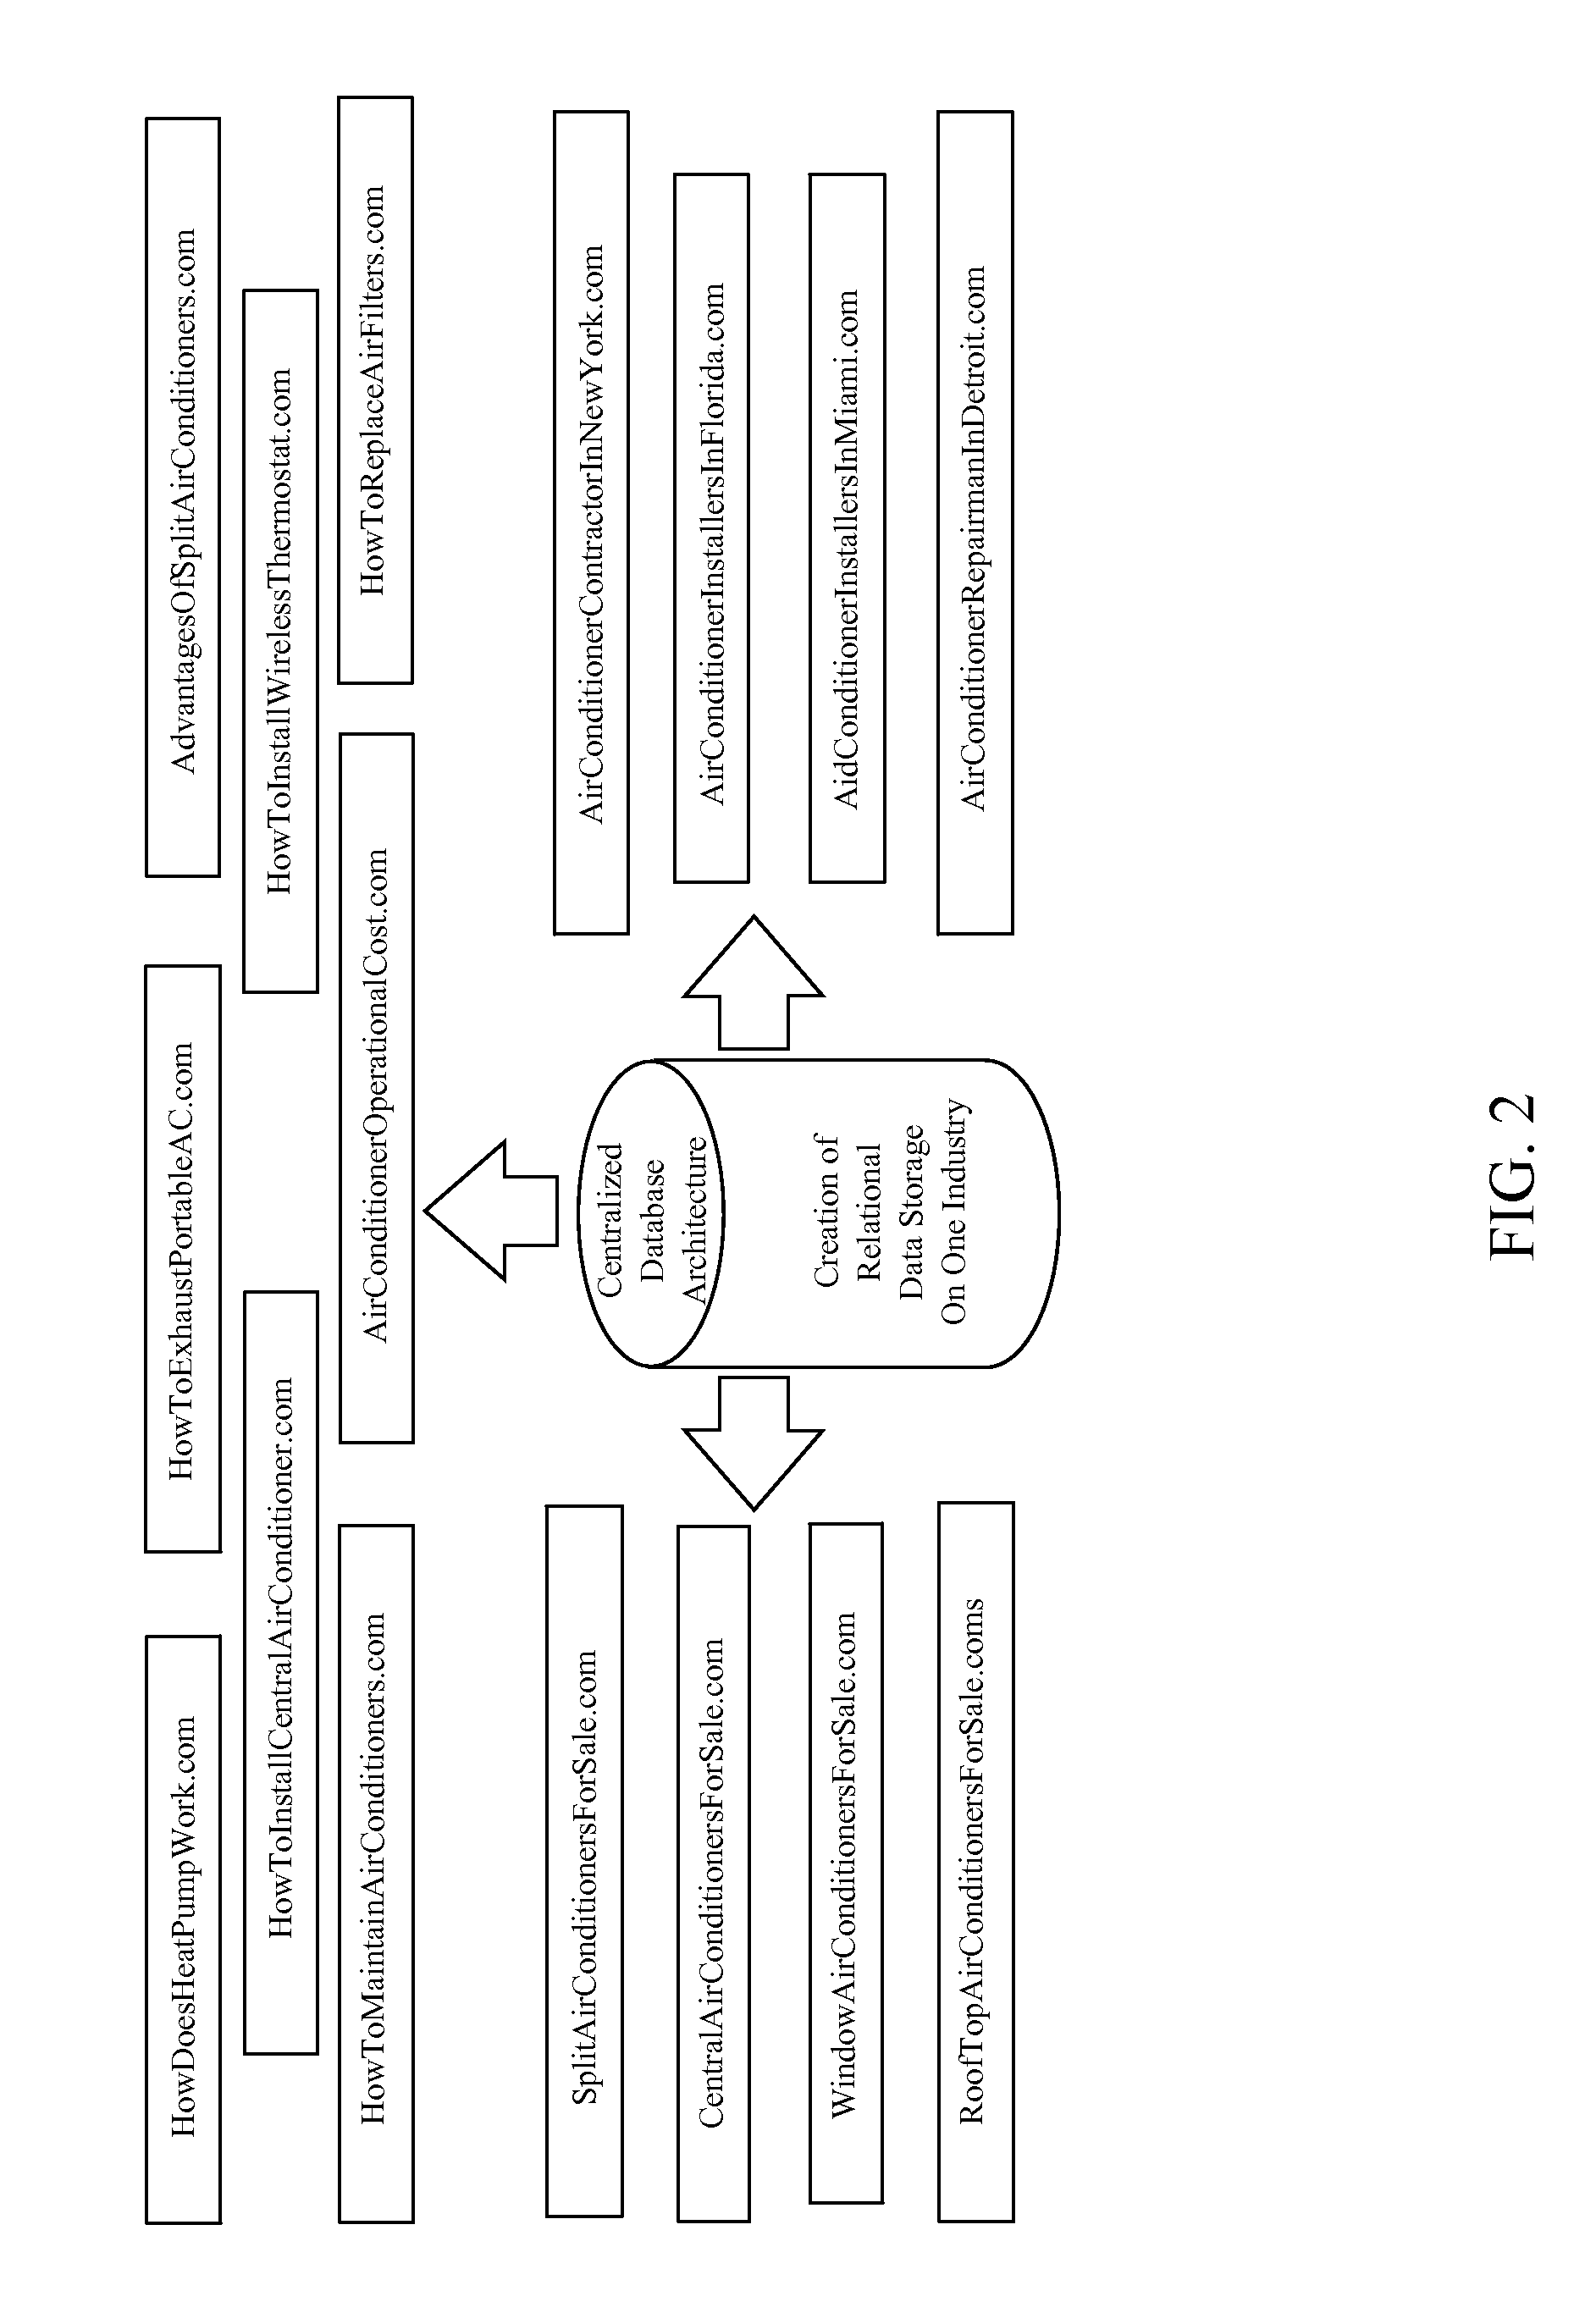 Method for Interlacing Multiple Internet domain names with a Database Driven Website to Obtain Better Webpage Ranking on Major Search Engines by Executing Computer-Executable Instructions Stored On a Non-Transitory Computer-Readable Medium